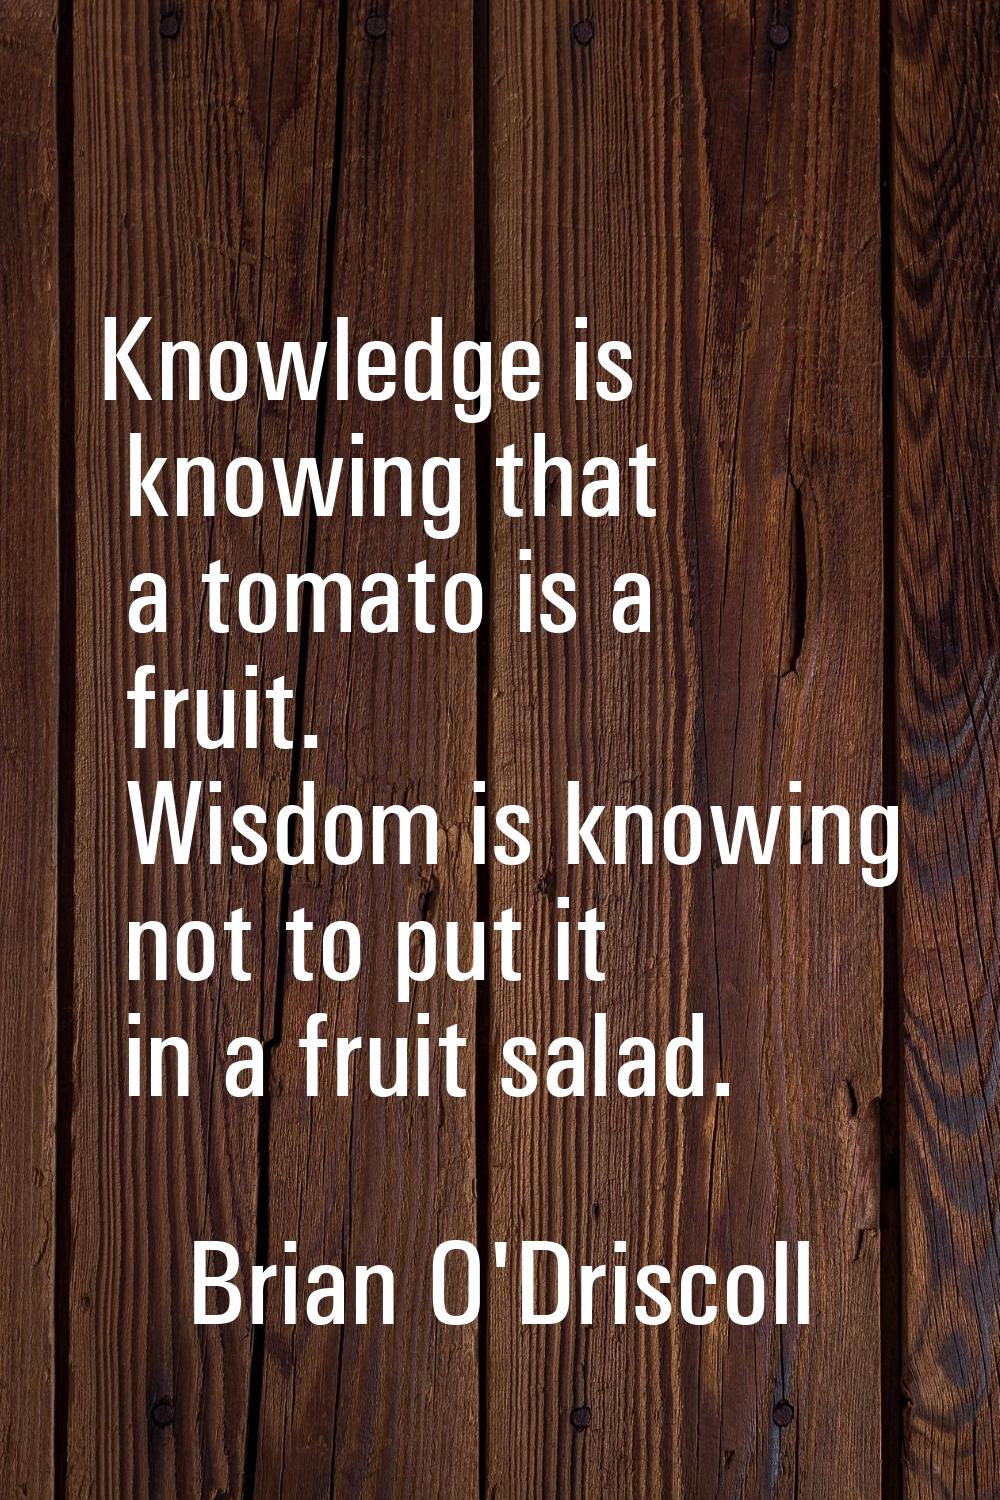 Knowledge is knowing that a tomato is a fruit. Wisdom is knowing not to put it in a fruit salad.